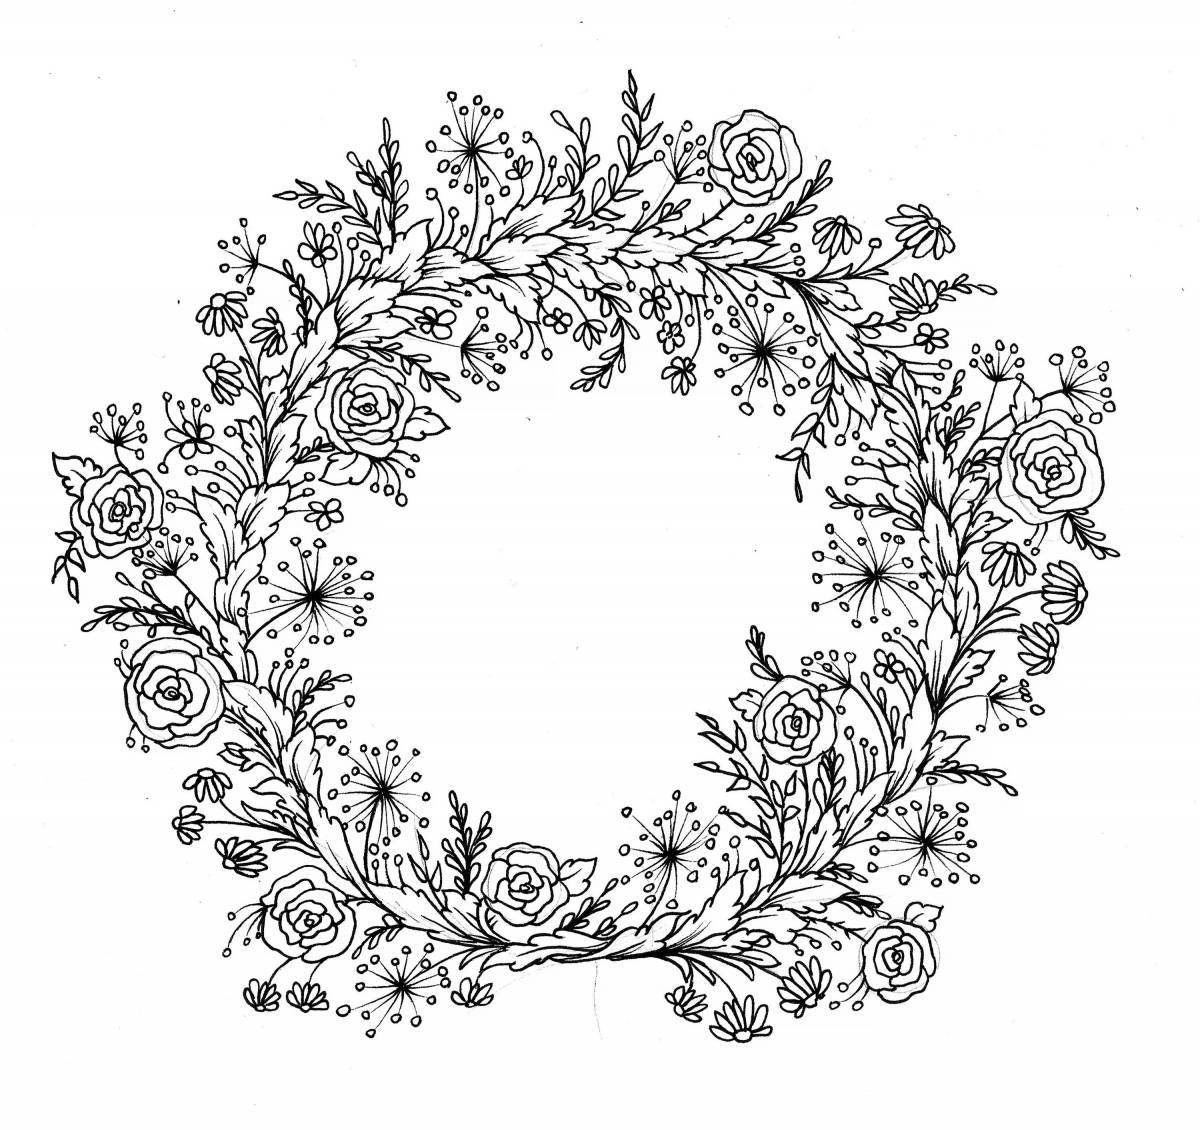 Coloring page nice wreath of flowers